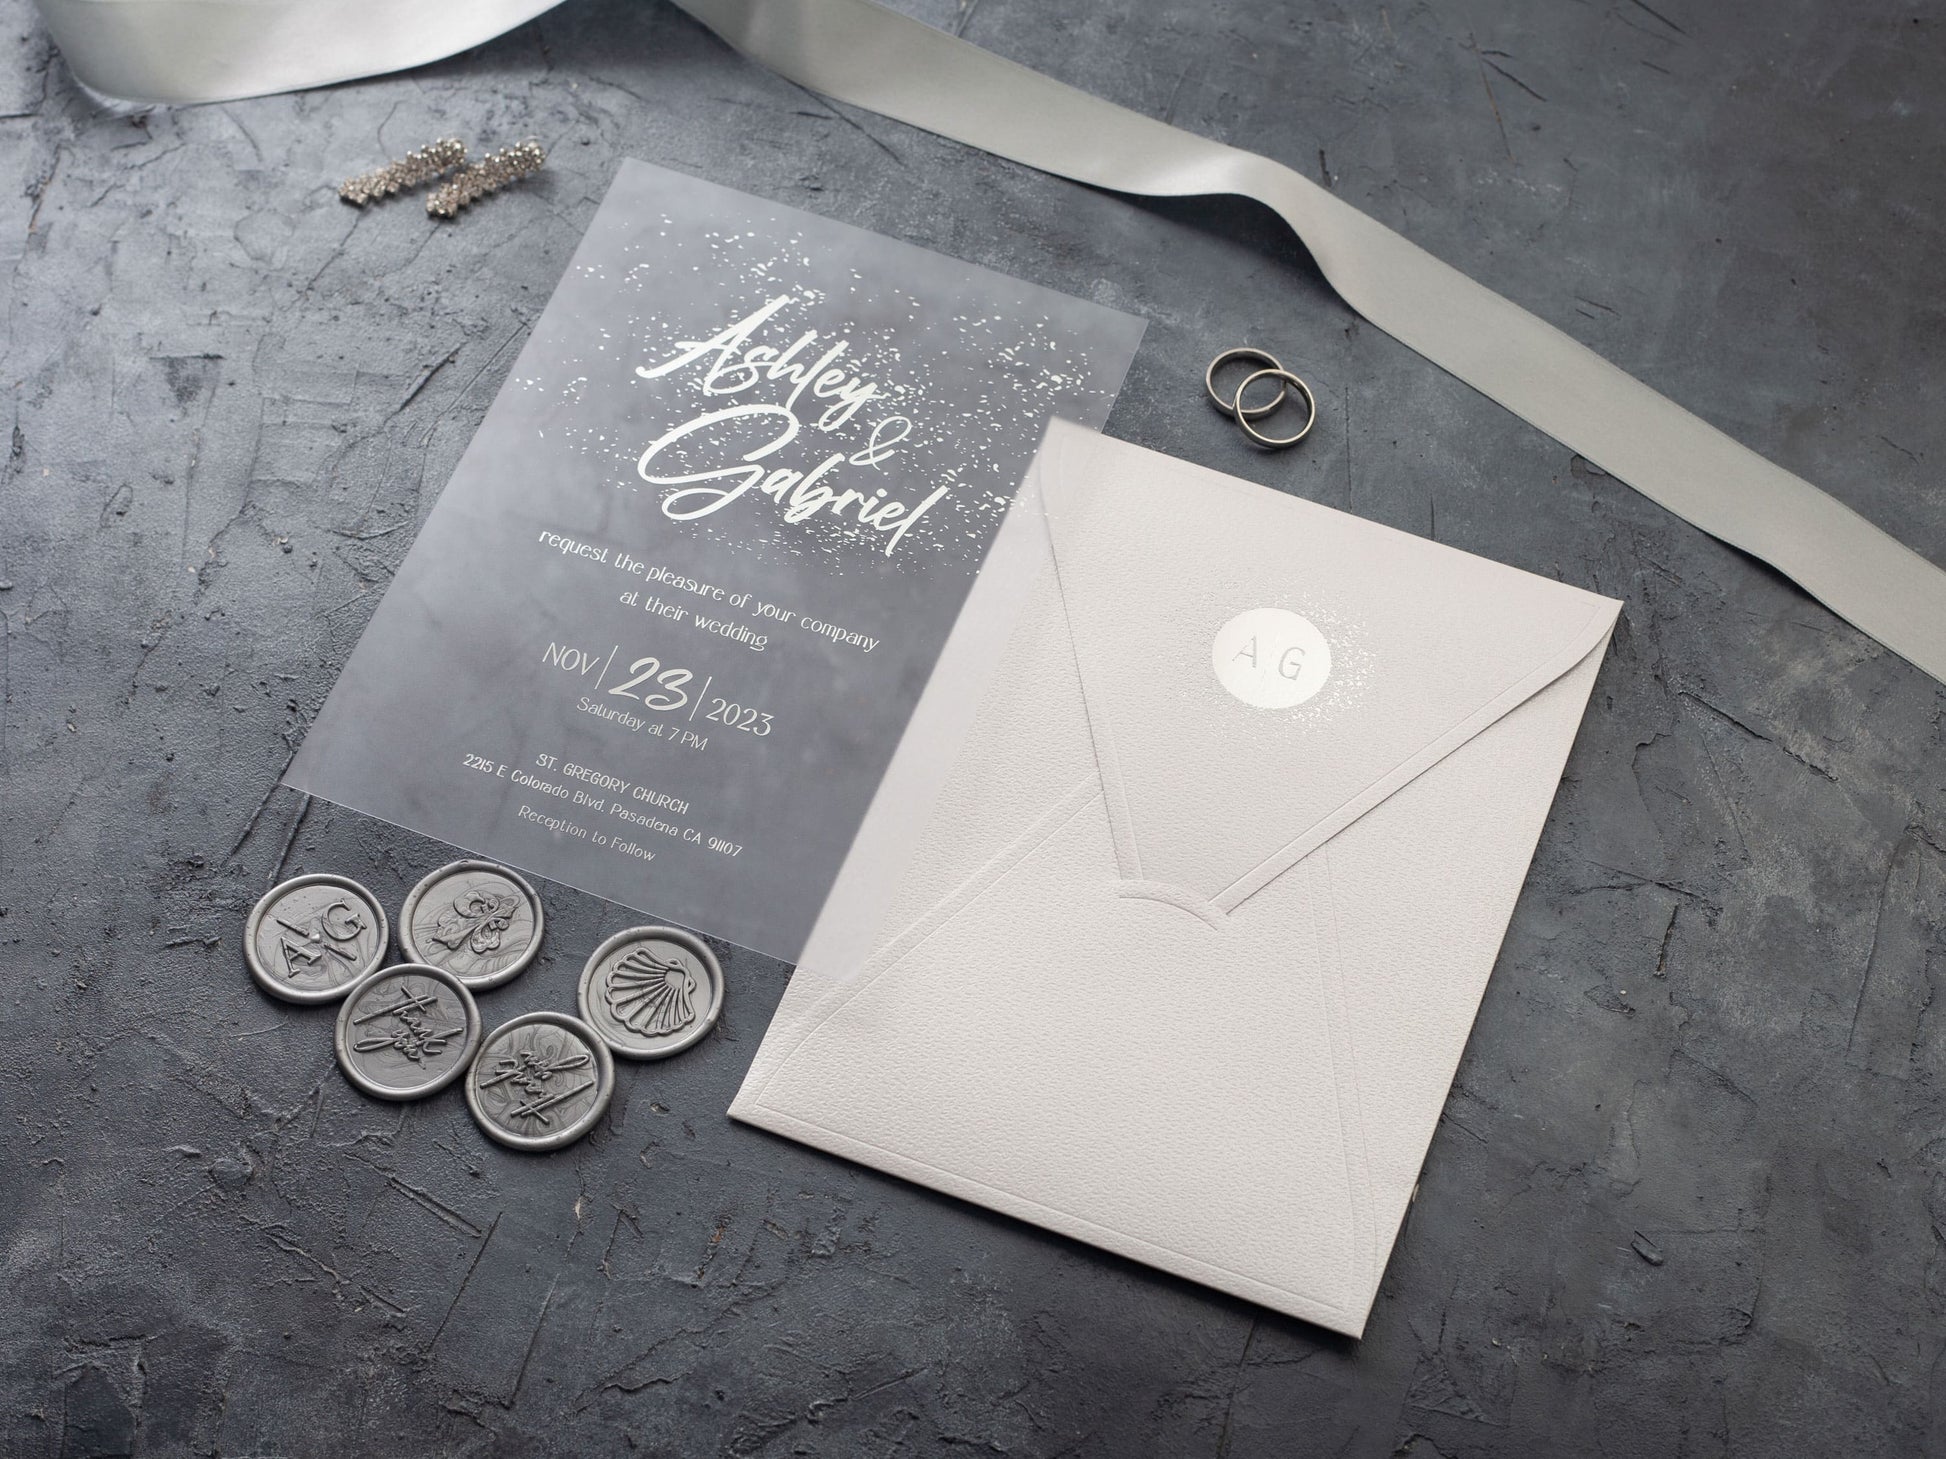 Silver foil printed acrylic invitation with white envelope